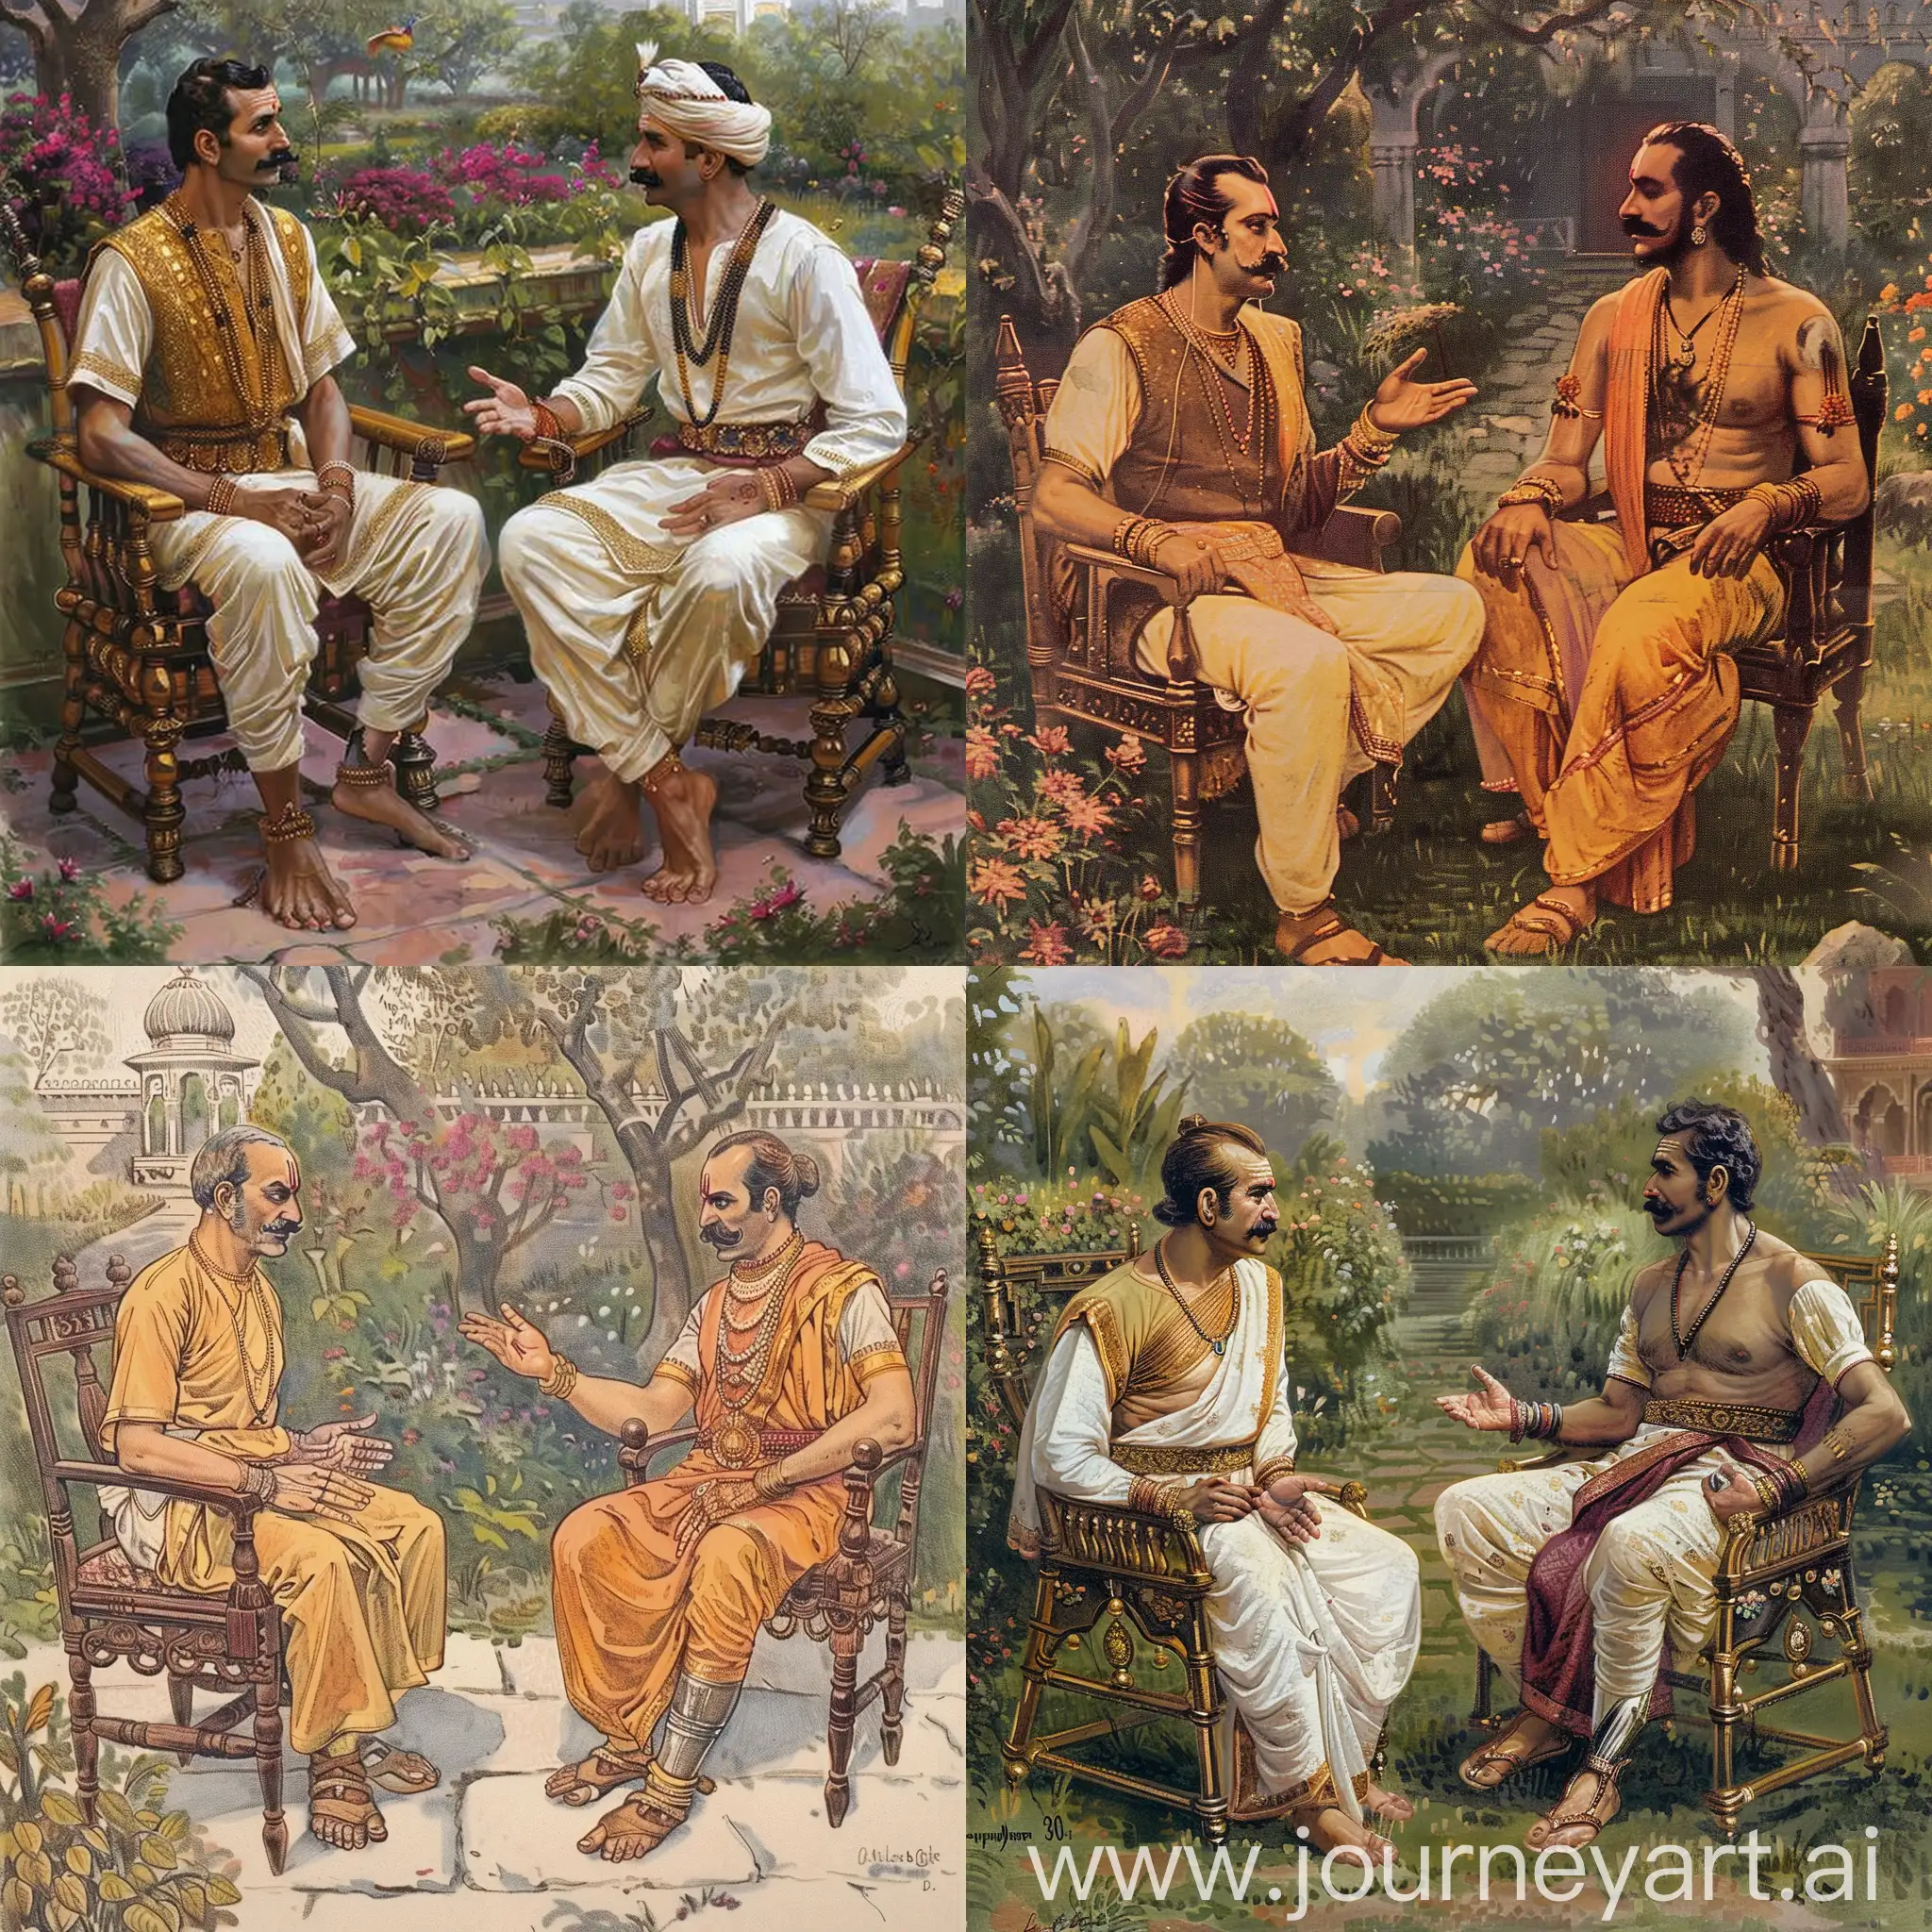 Year is 1500 CE. Imagine two rajput kings talking to each other sitting on chairs in a garden. One king has moustache and clean shaven, one hand is amputated. The other king has moustache and beard. Both kings are 30 years old.